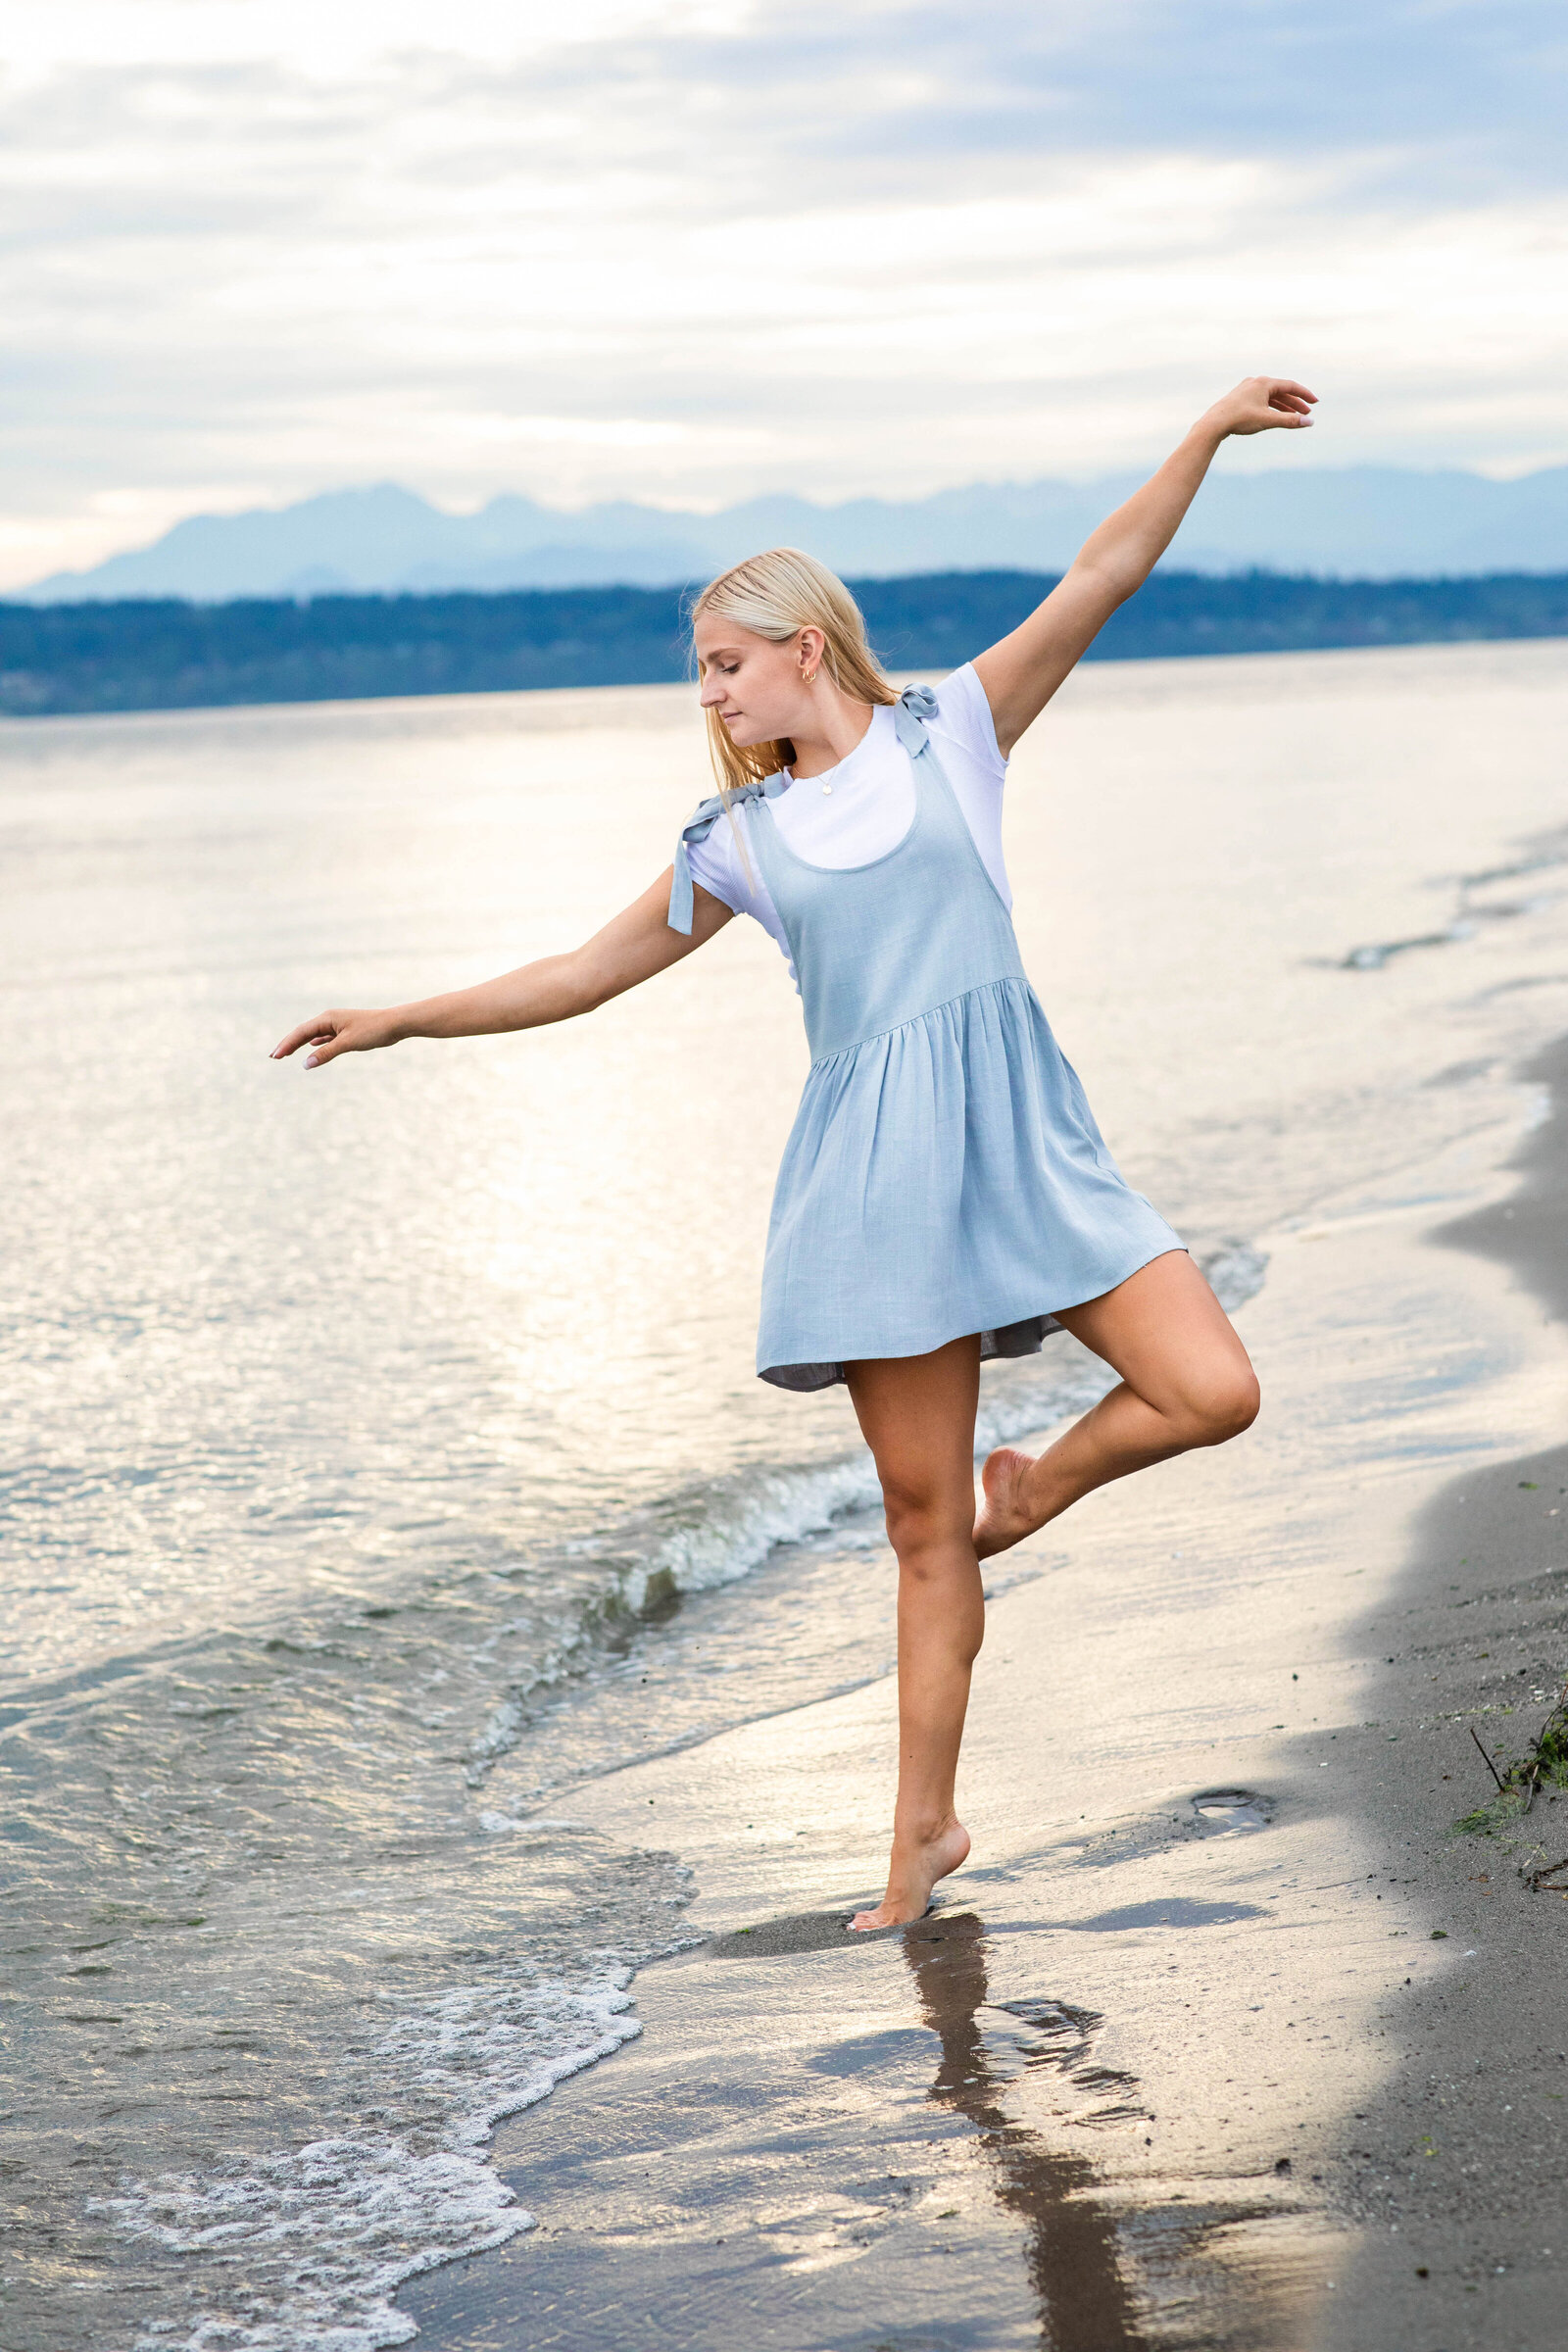 Senior Girl ballet in the water Discovery Park Seattle